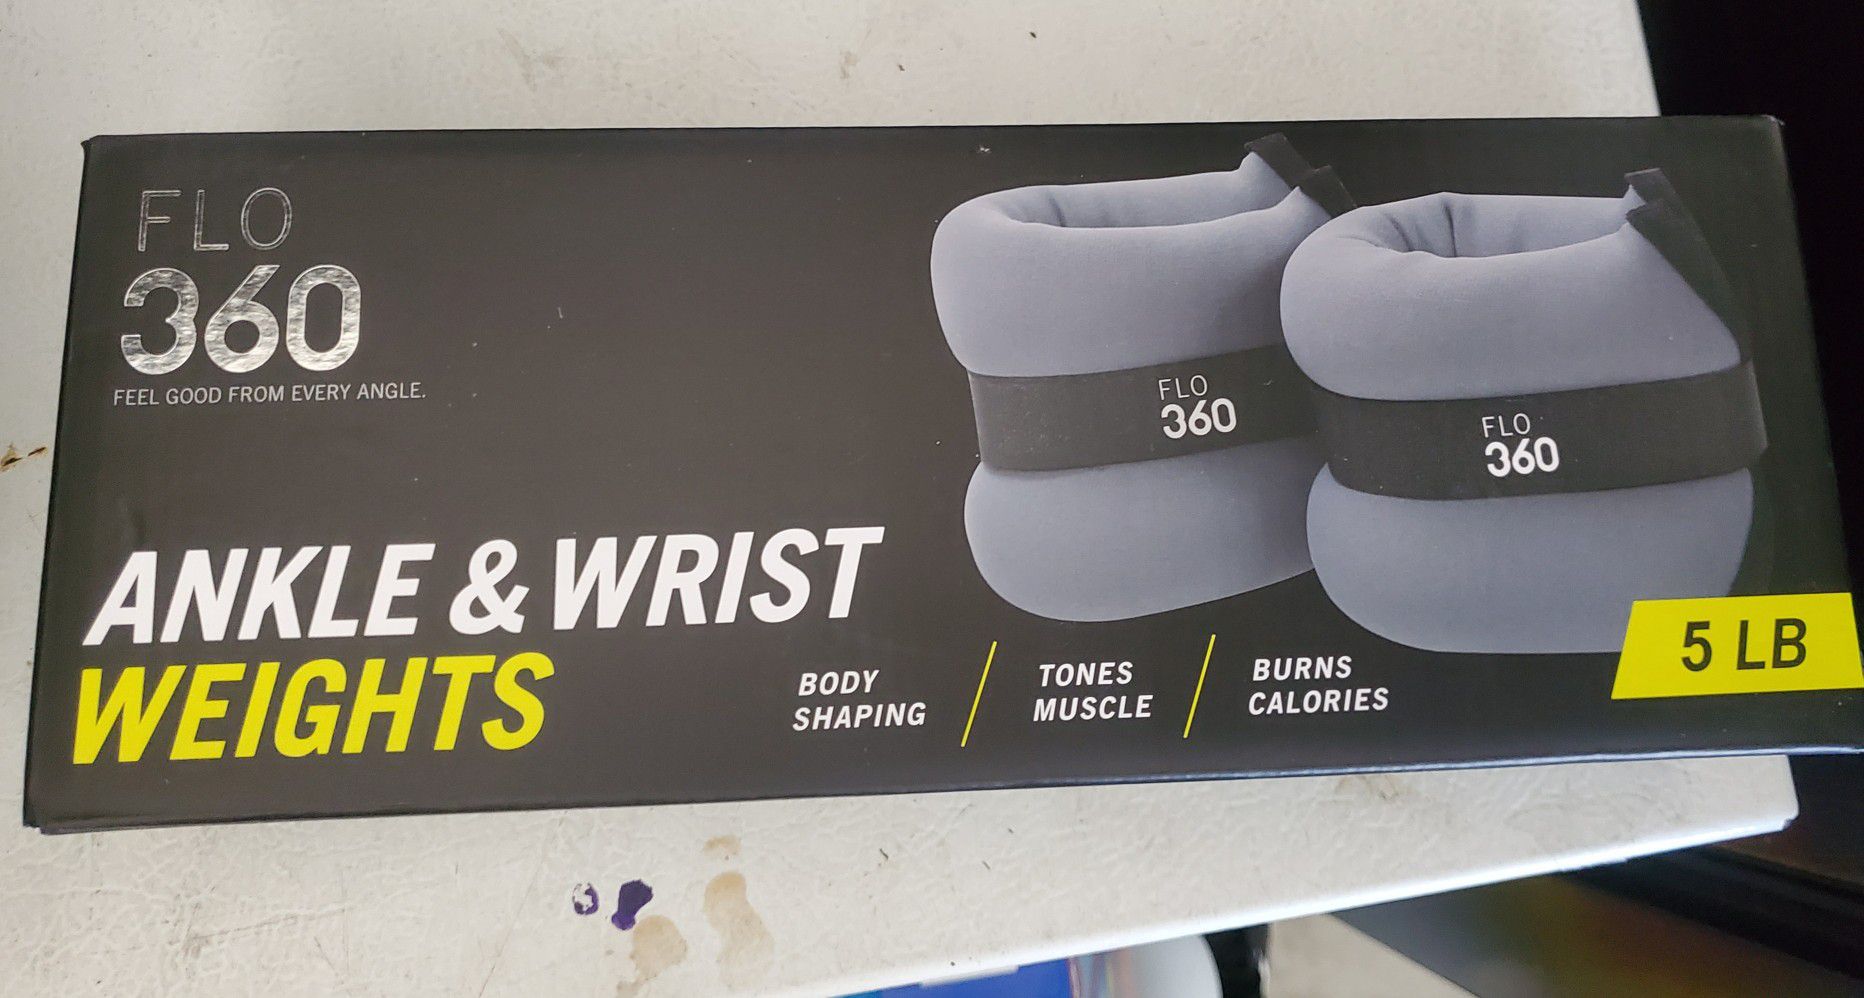 FLO 360 ankle and wrist weights